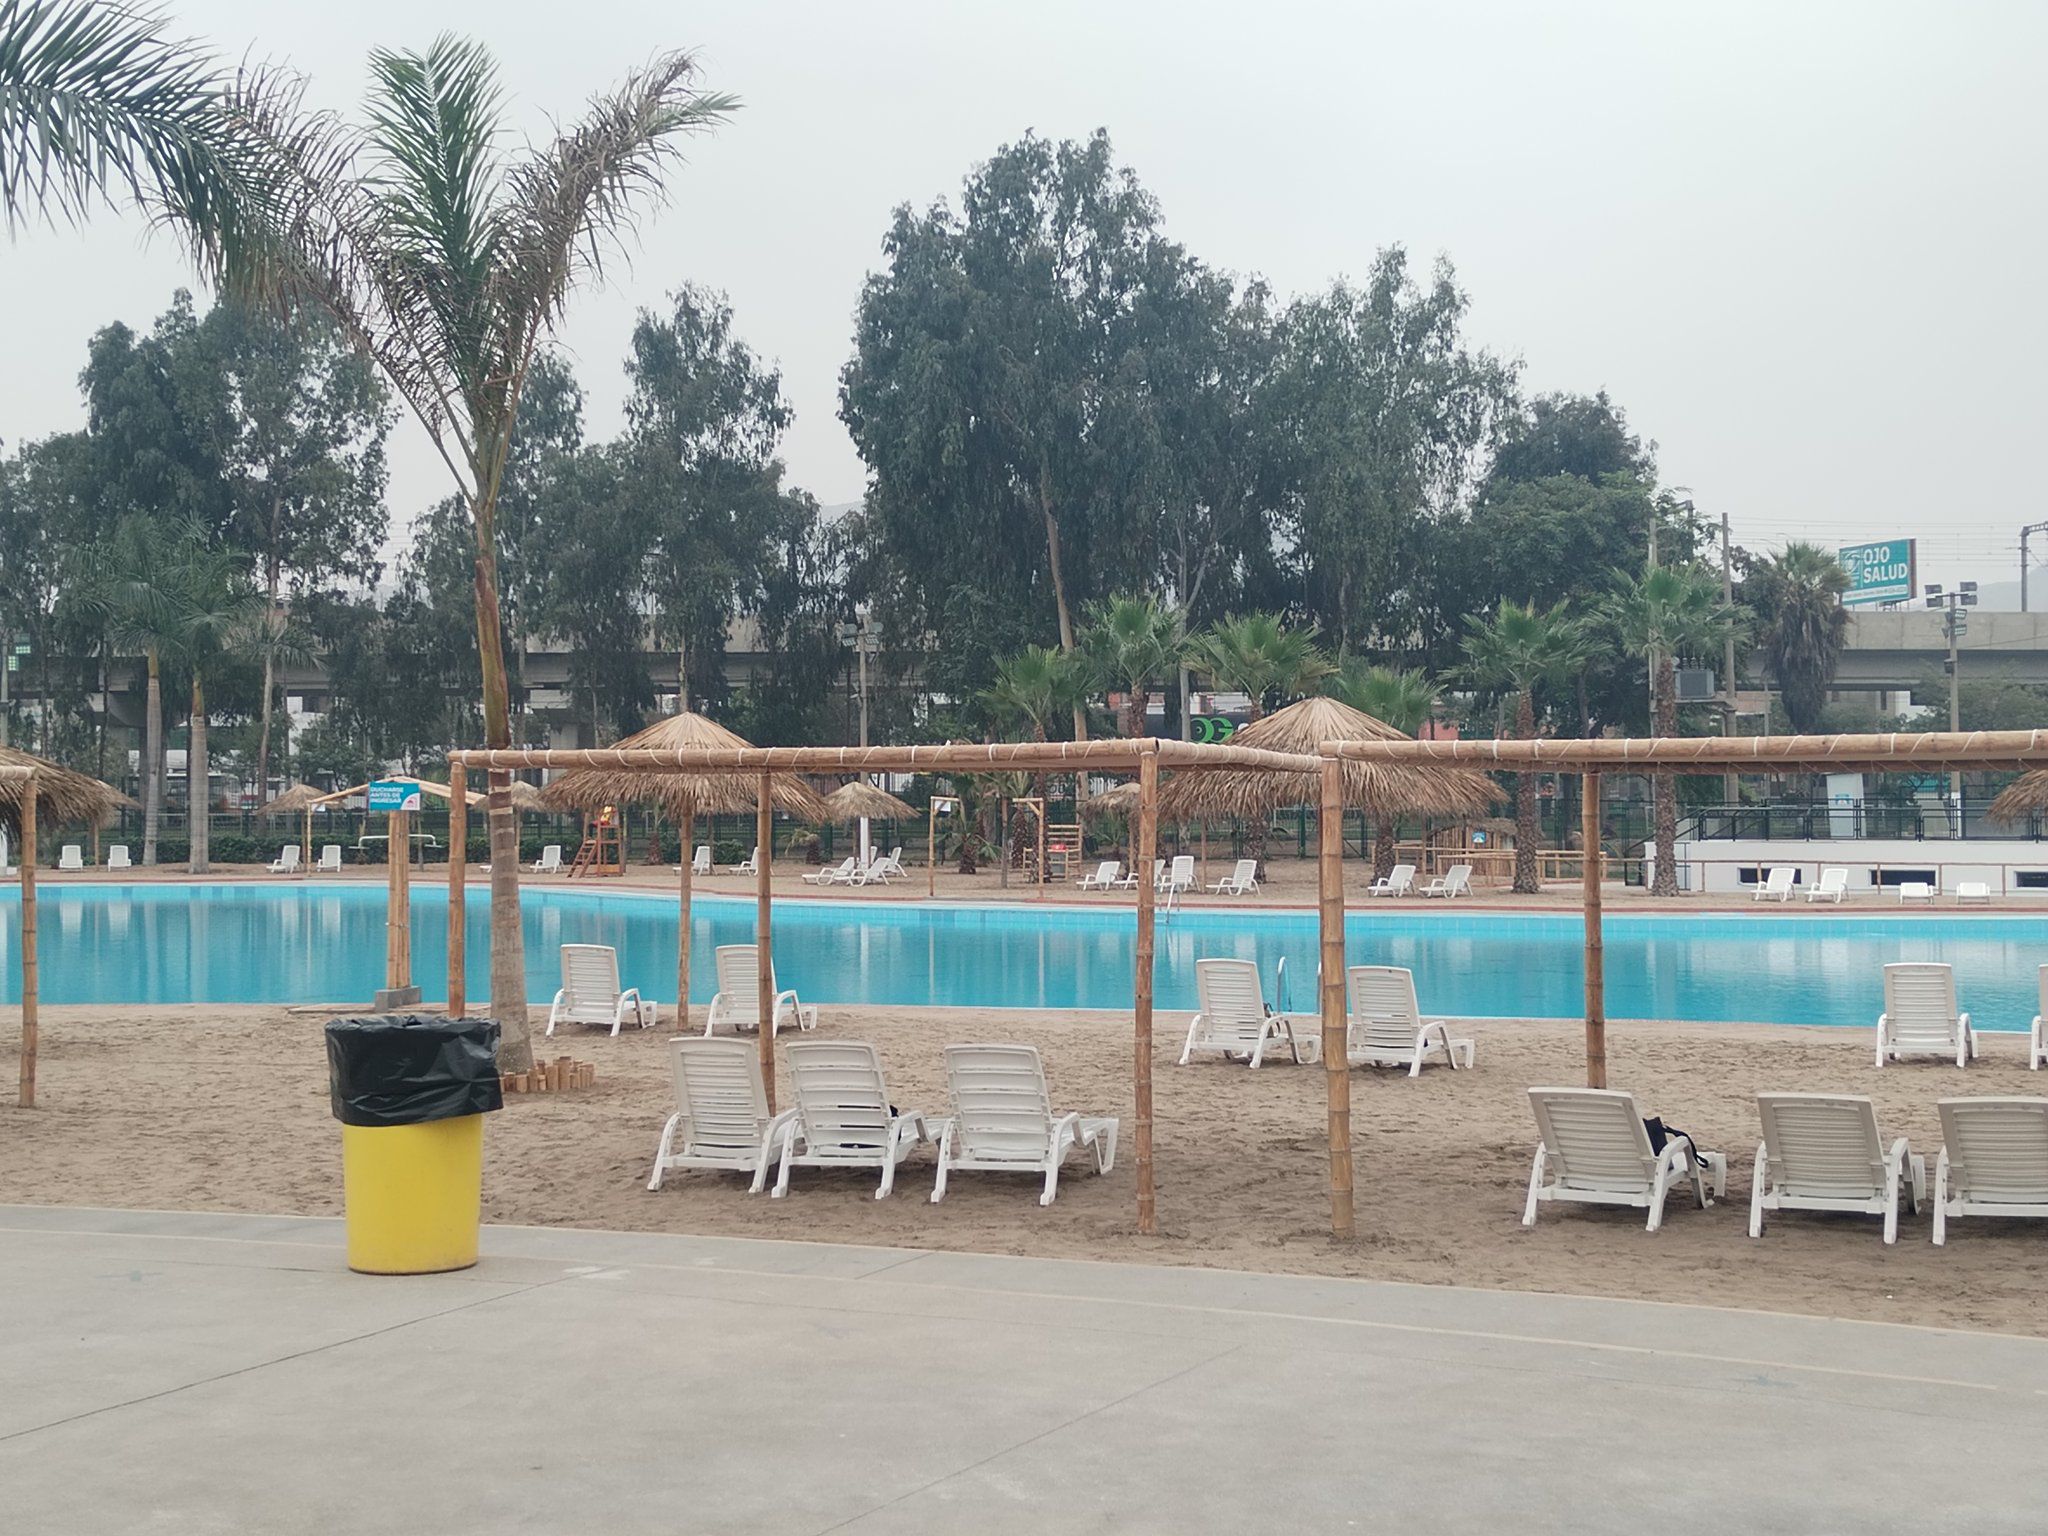 The mayor of Lima, Rafael López Aliaga, assured that the project would have the best pool cleaning facilities of the eleven metropolitan clubs.